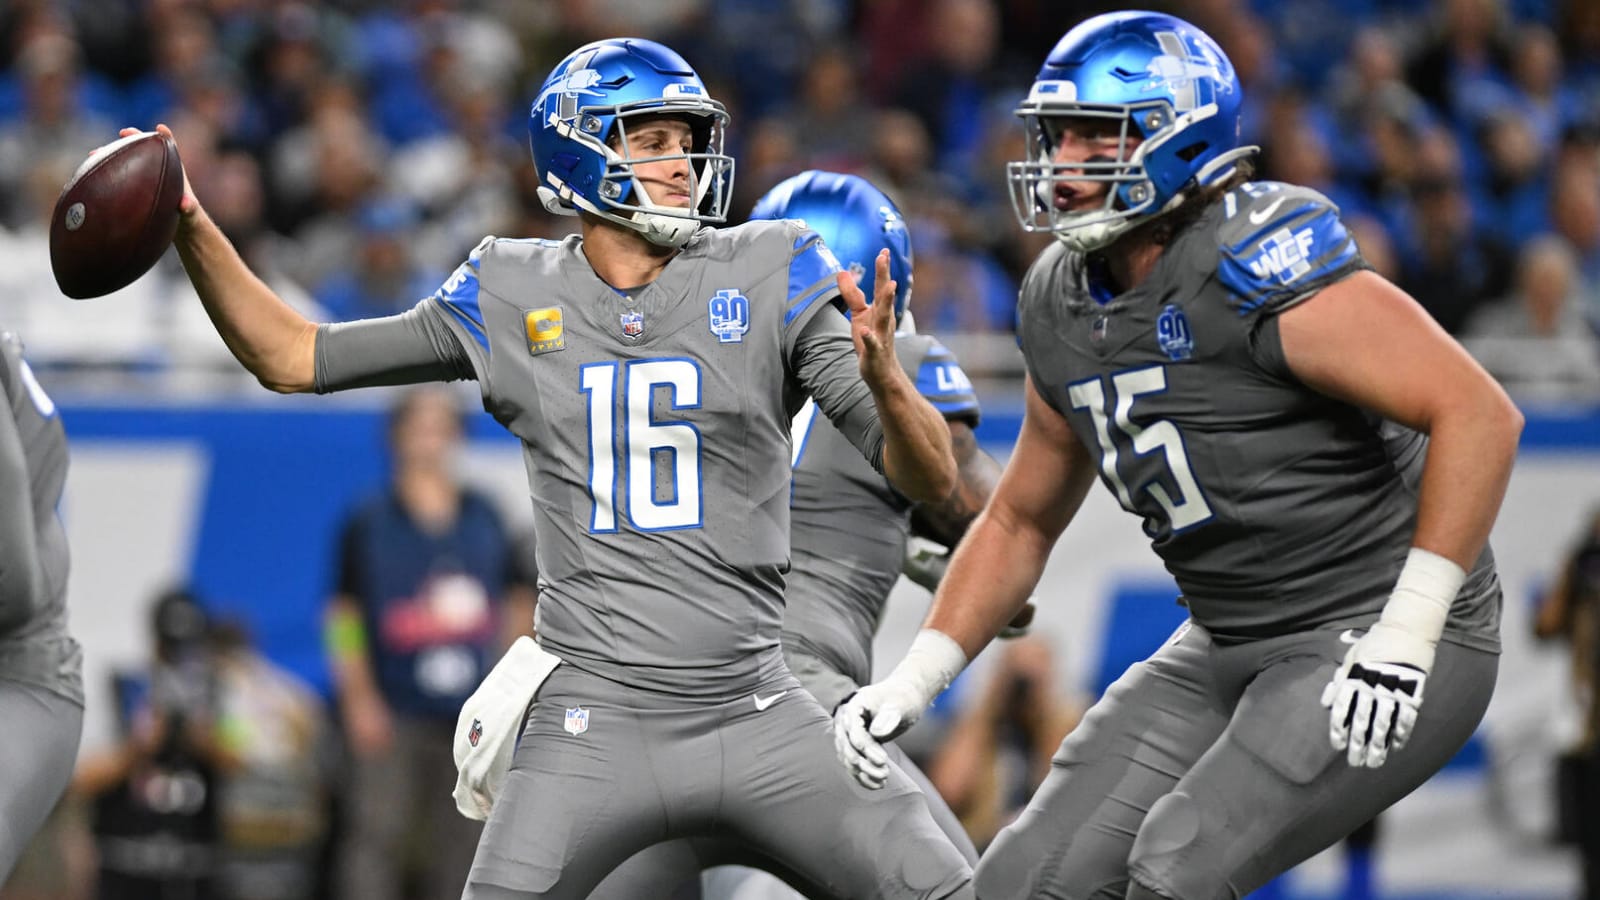 NFL Week 10: Detroit Lions vs. Los Angeles Chargers, betting picks, preview